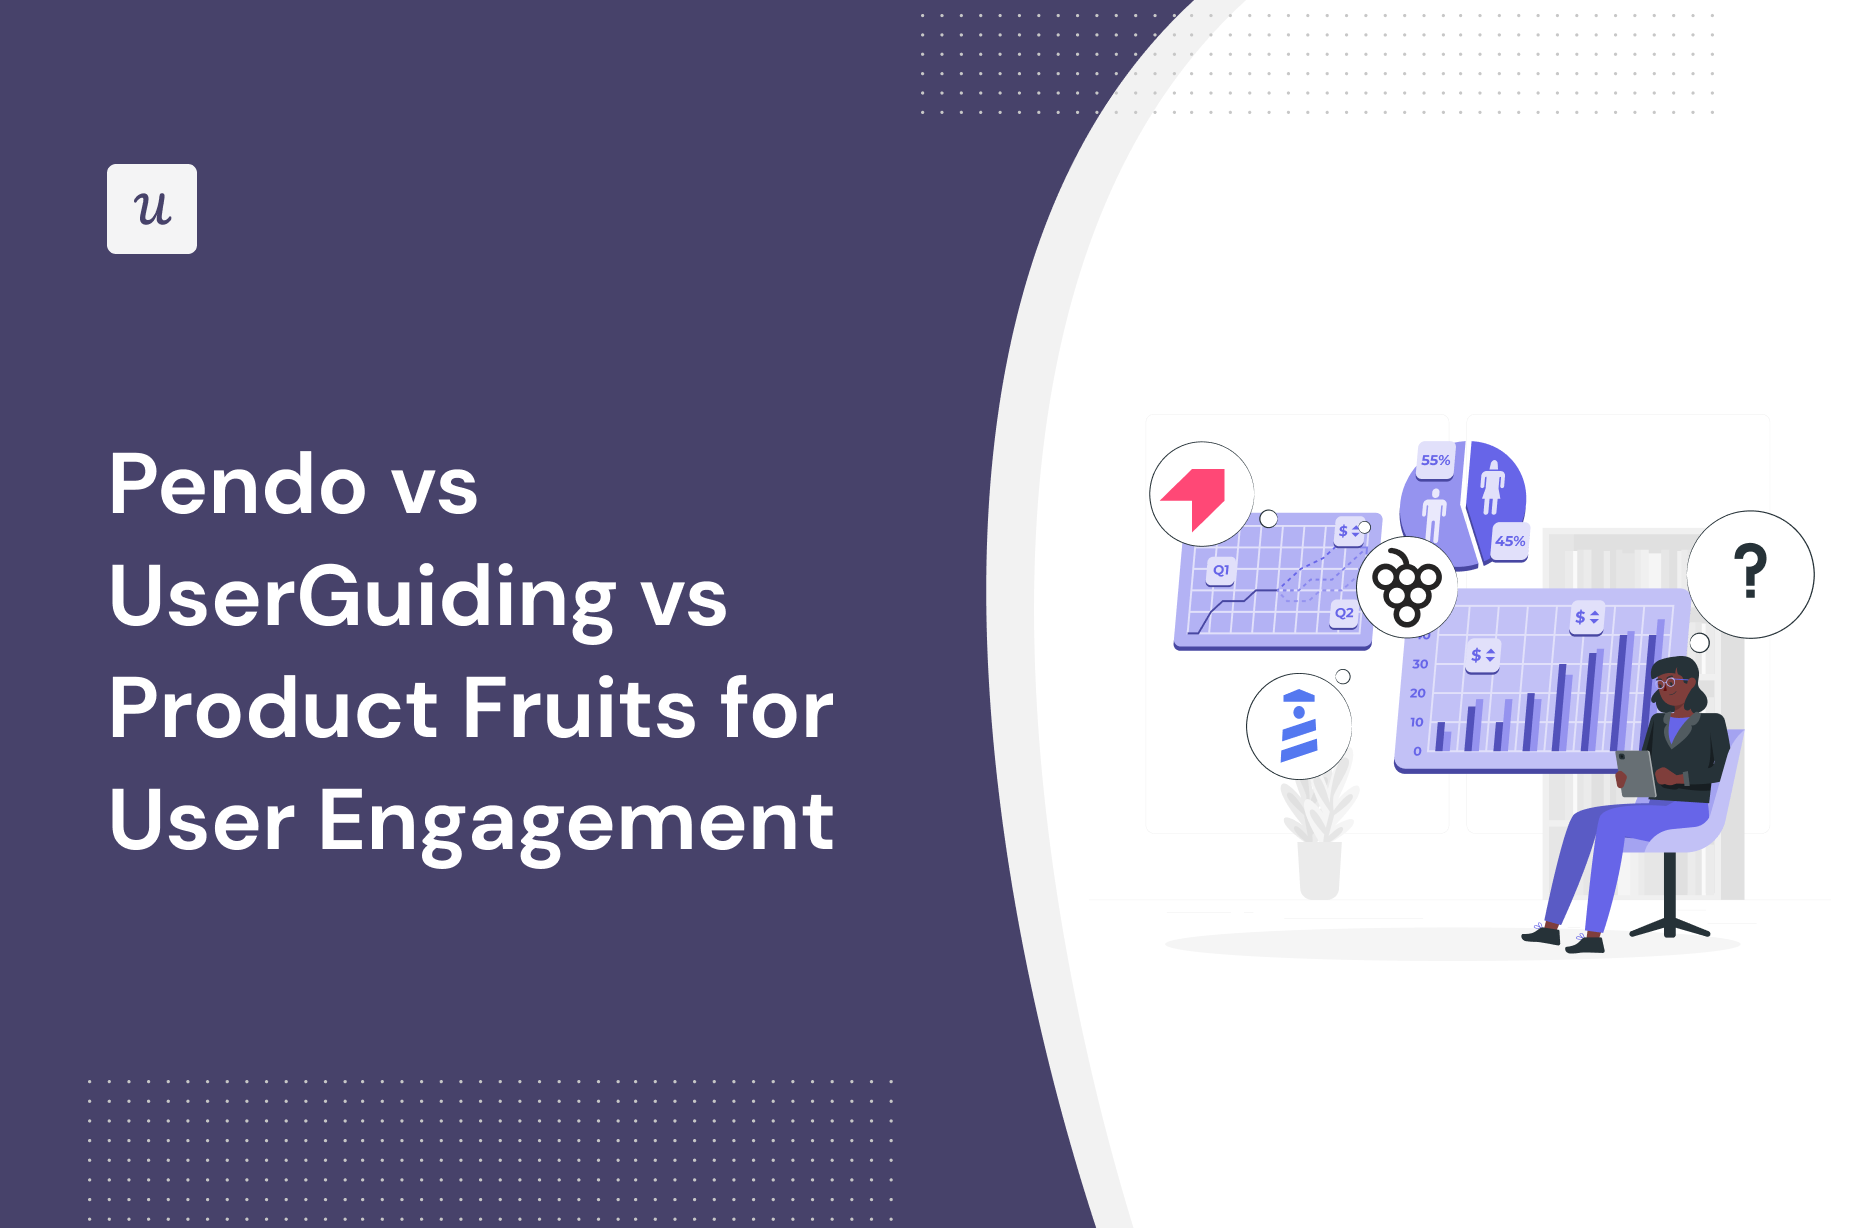 Pendo vs UserGuiding vs Product Fruits for User Engagement